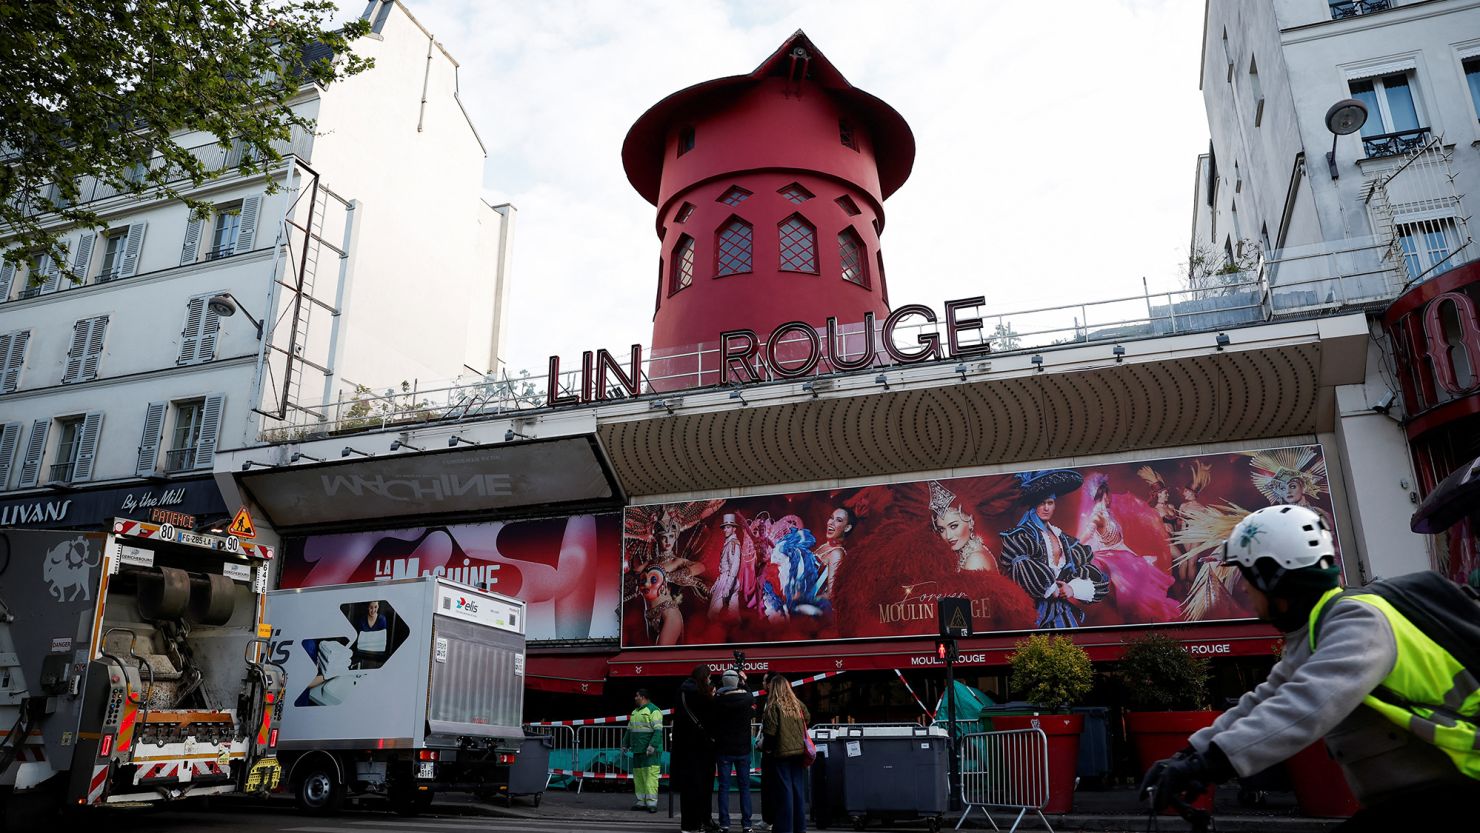 The Moulin Rouge in Paris with its name partially snapped off after the blades of its prominent red windmill fell off overnight.